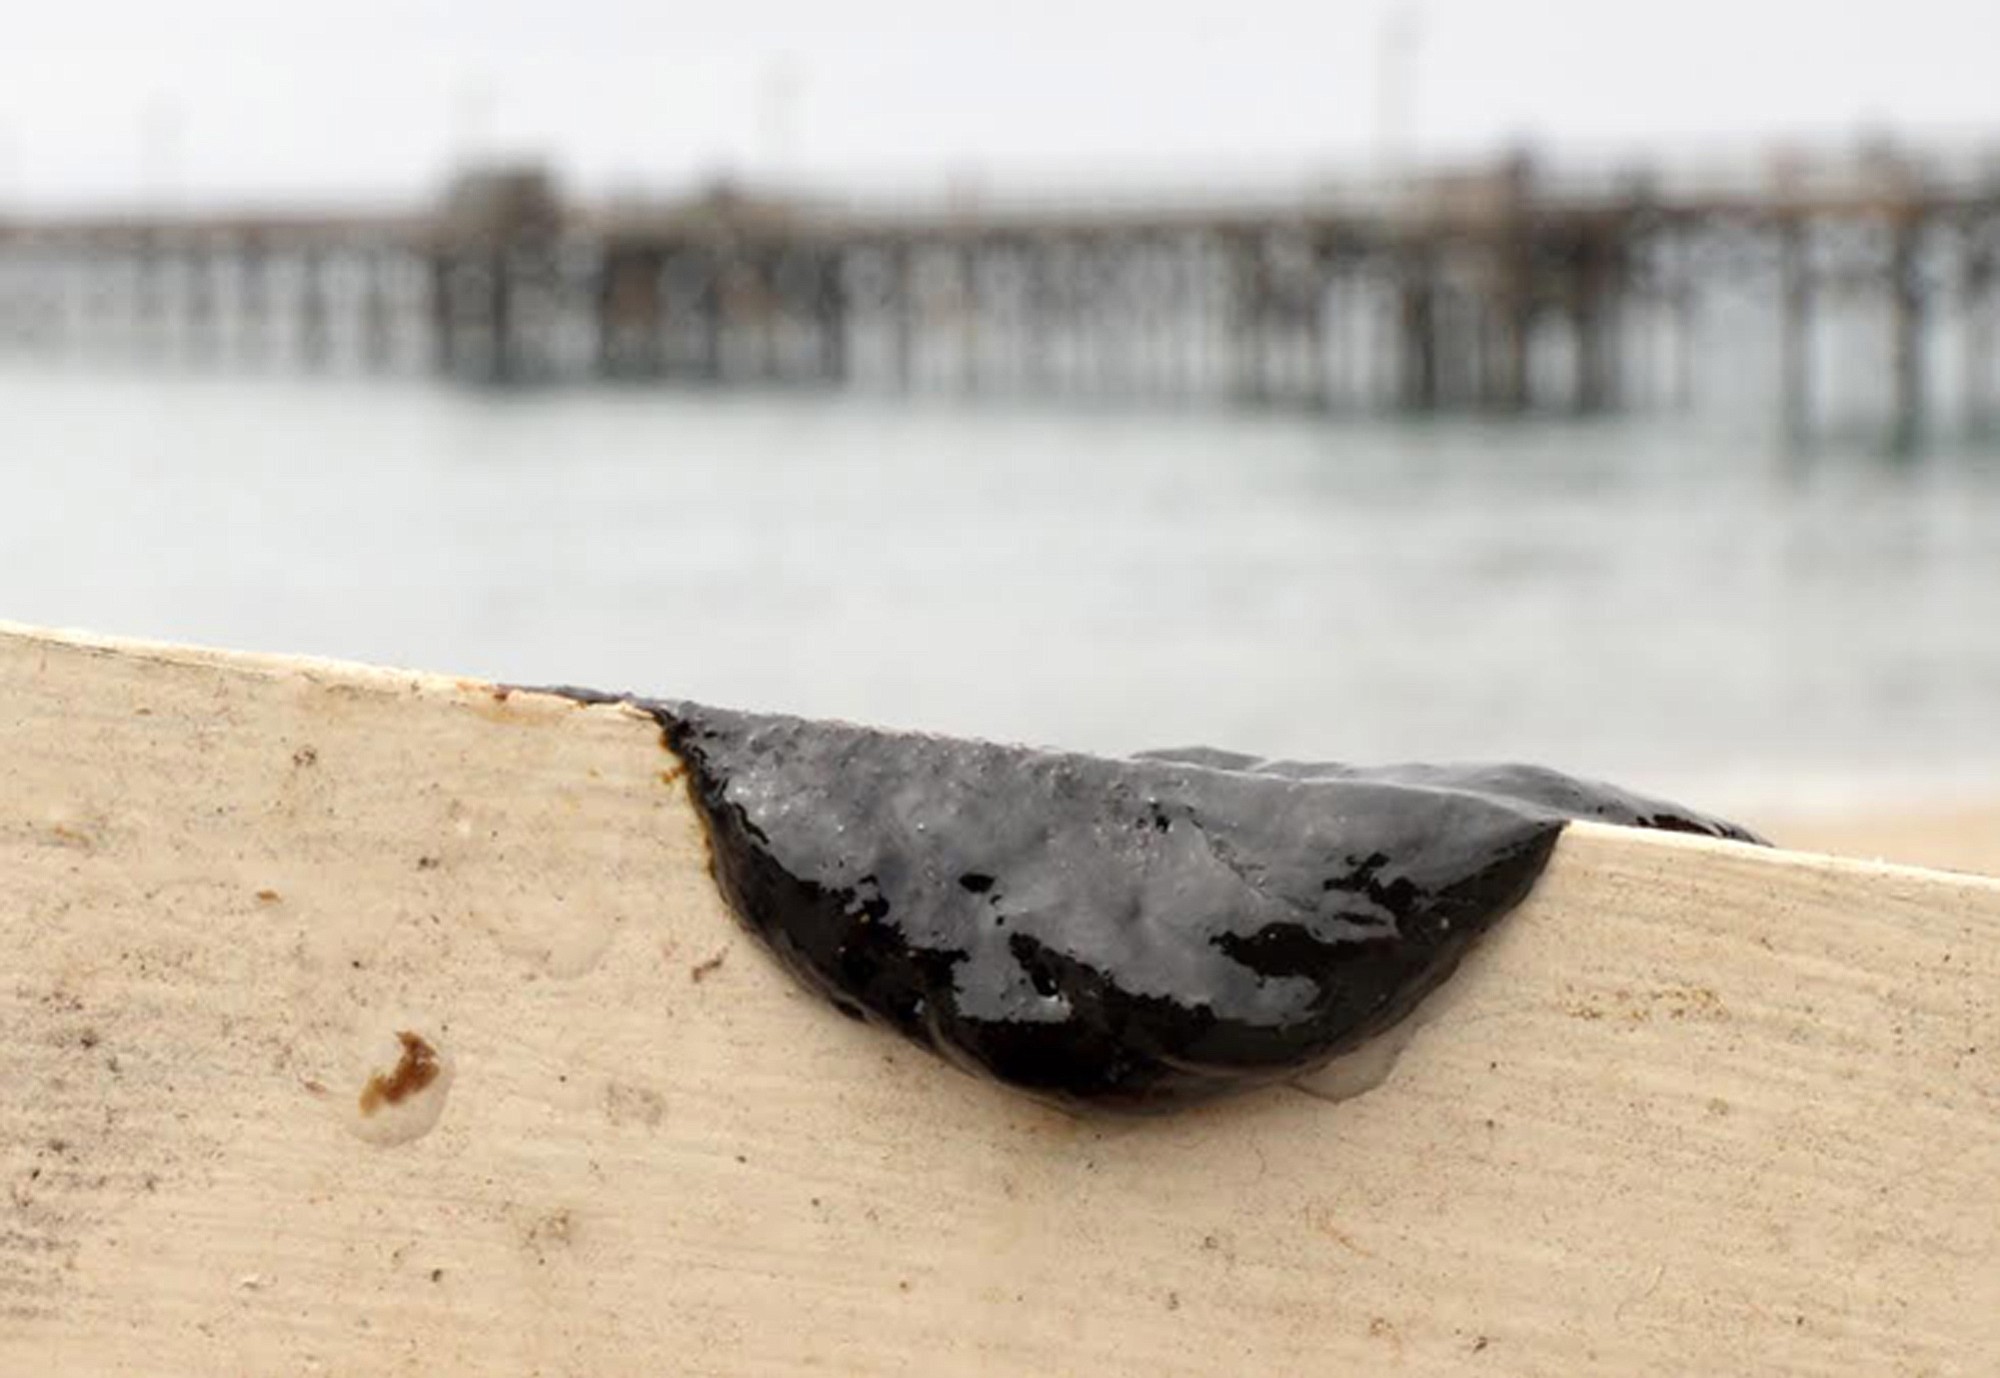 A sample of oil scraped off the side of a kayak after two kayakers encountered a large oil sheen and called the fire department to investigate, seen at the Goleta Beach parking lot in Goleta, Calif., on Wednesday.